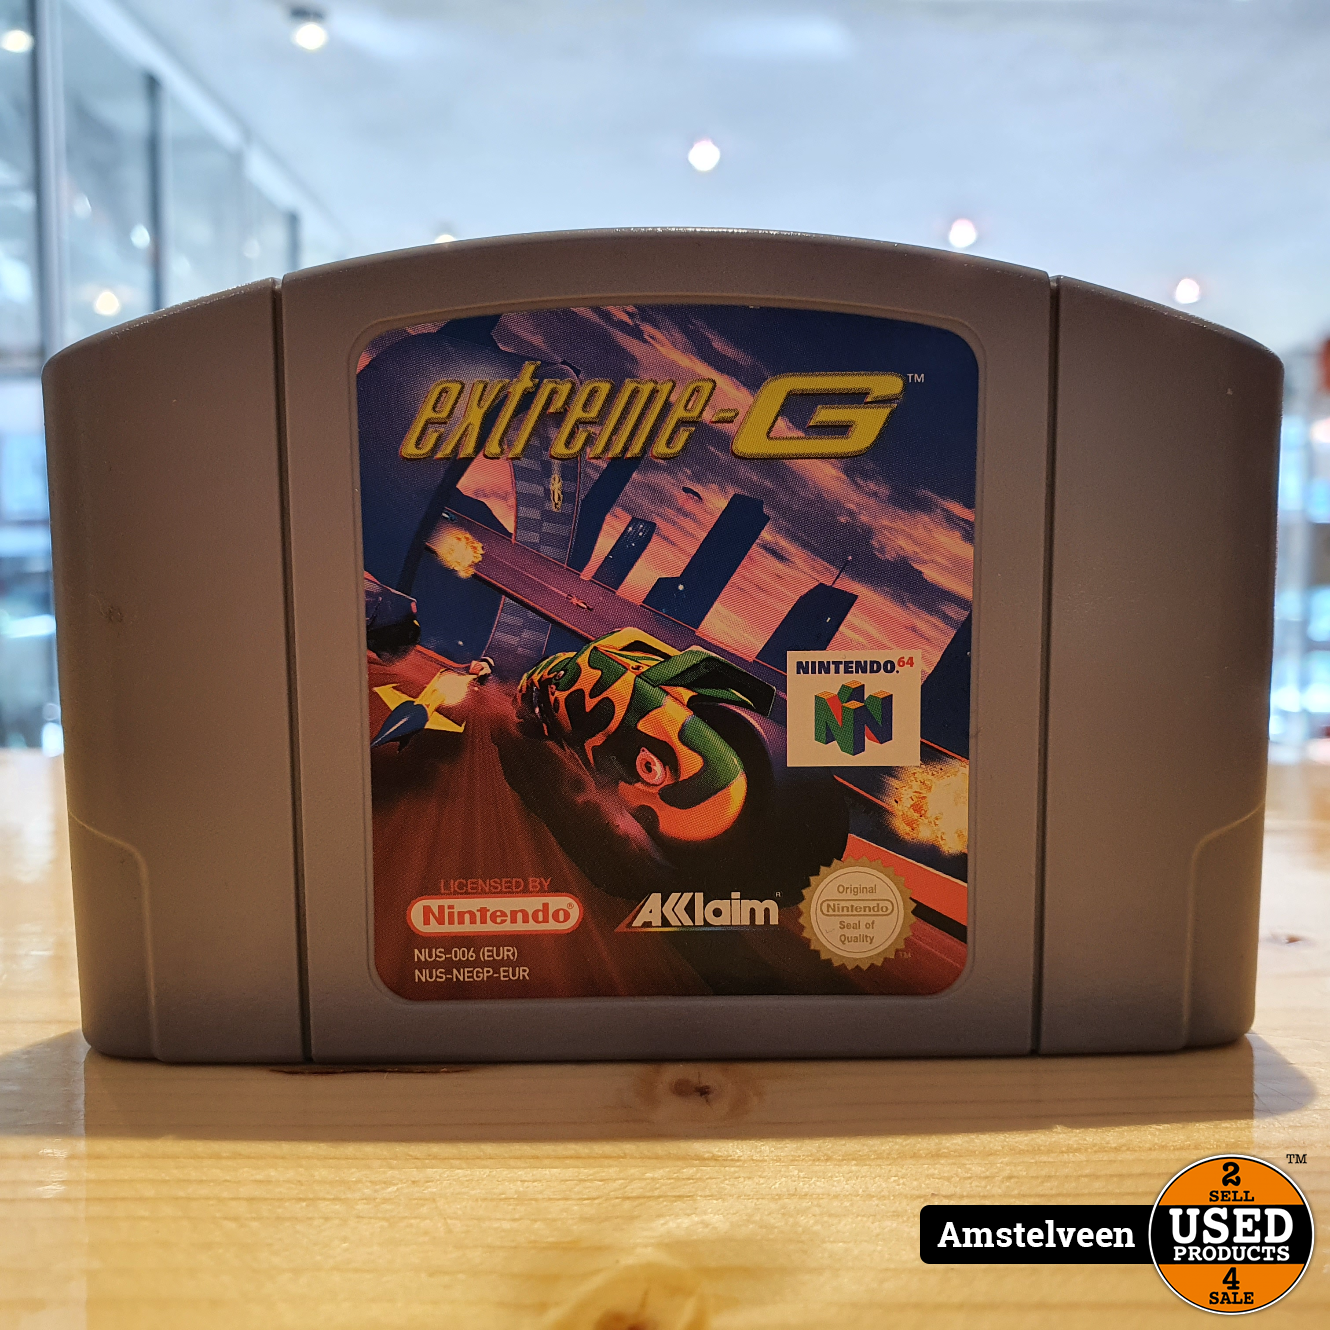 Nintendo 64 Extreme G (losse cassette) - Products Amstelveen